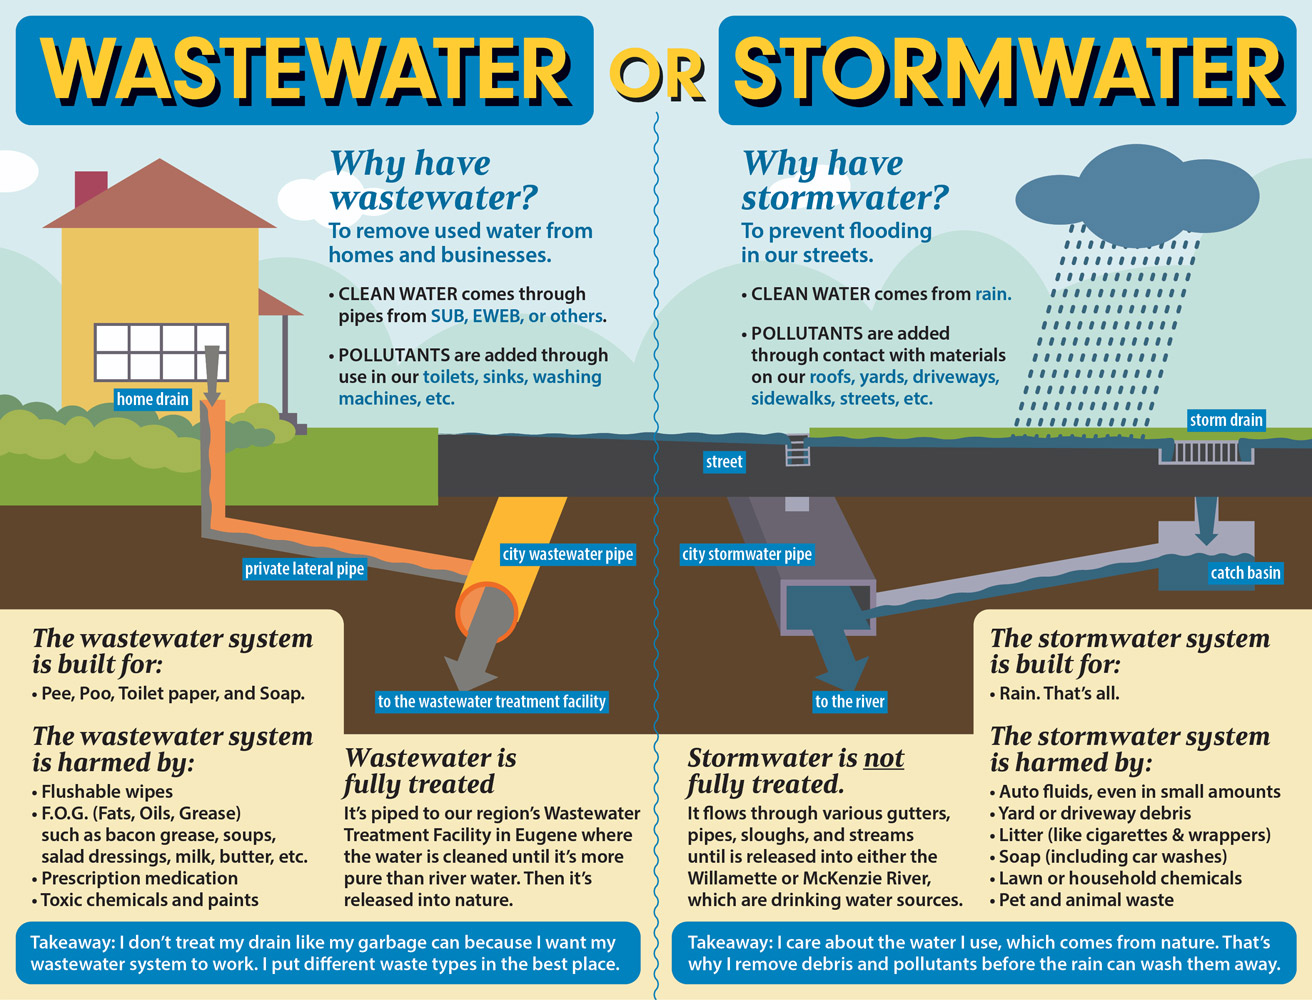 Illustration of the wastewater system compared to the stormwater system.